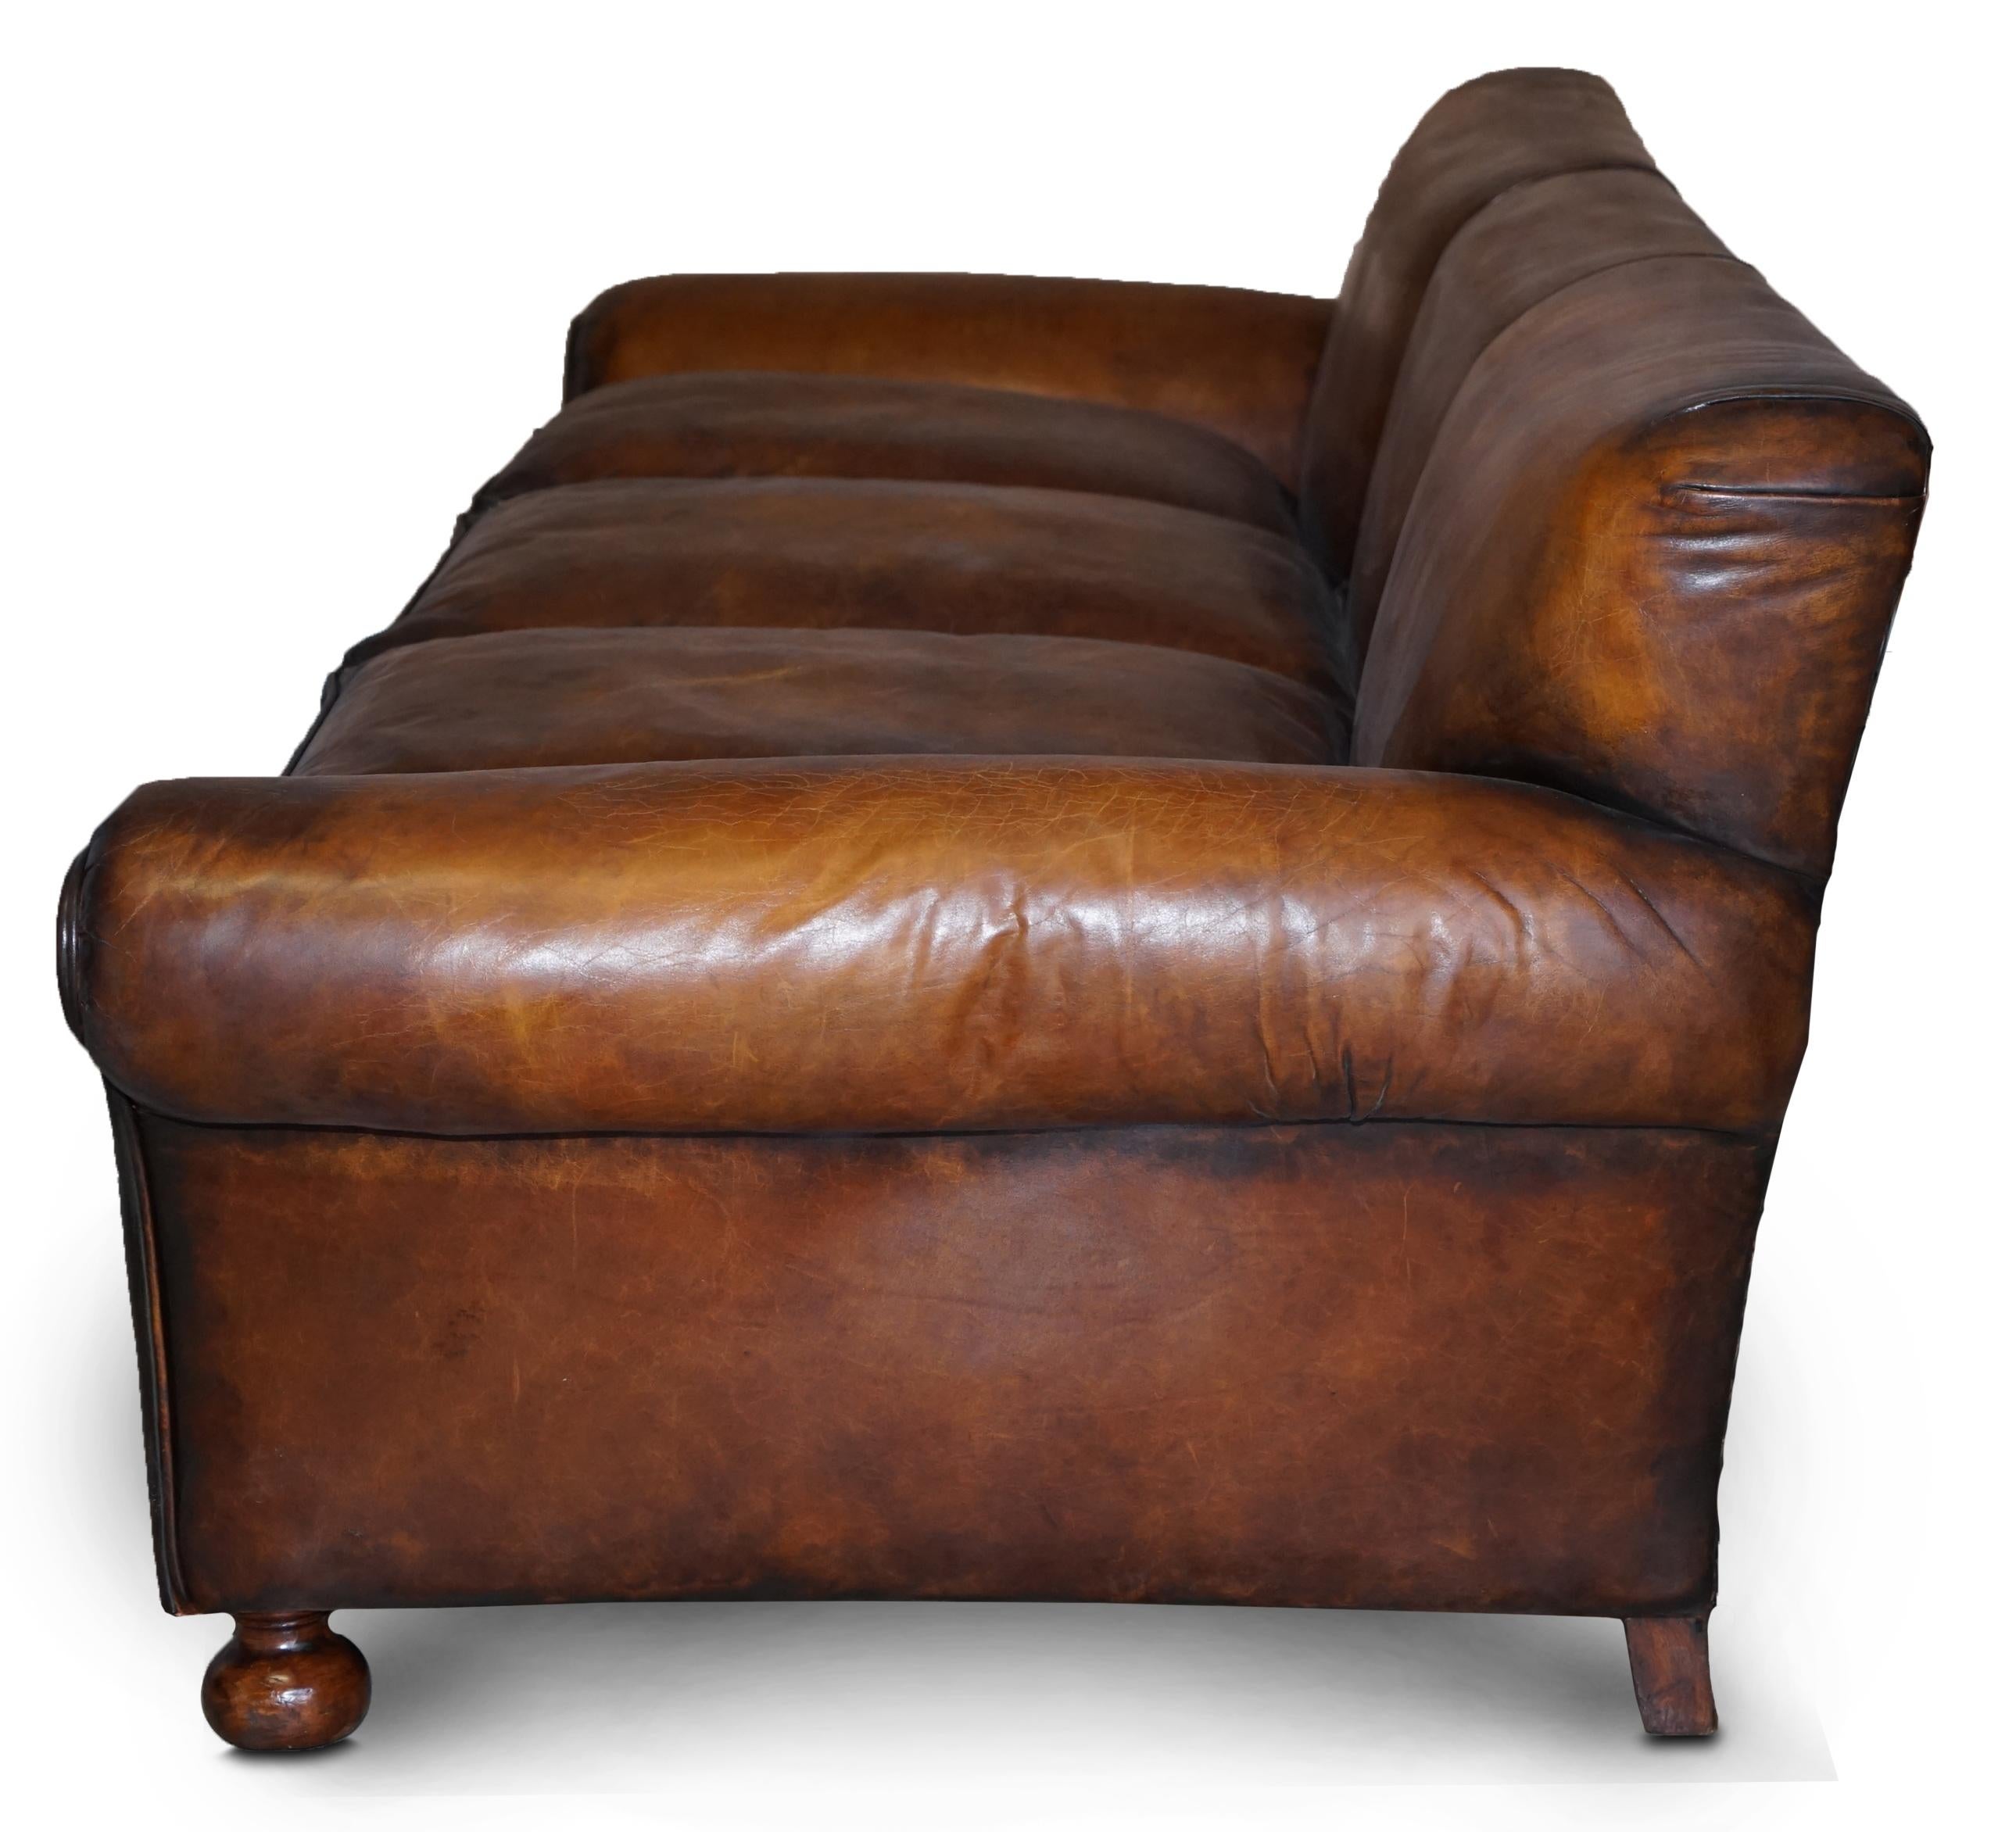 Restored Hand Dyed Brown Leather Antique Victorian 3-4 Seat Sofa Feather Seats For Sale 11